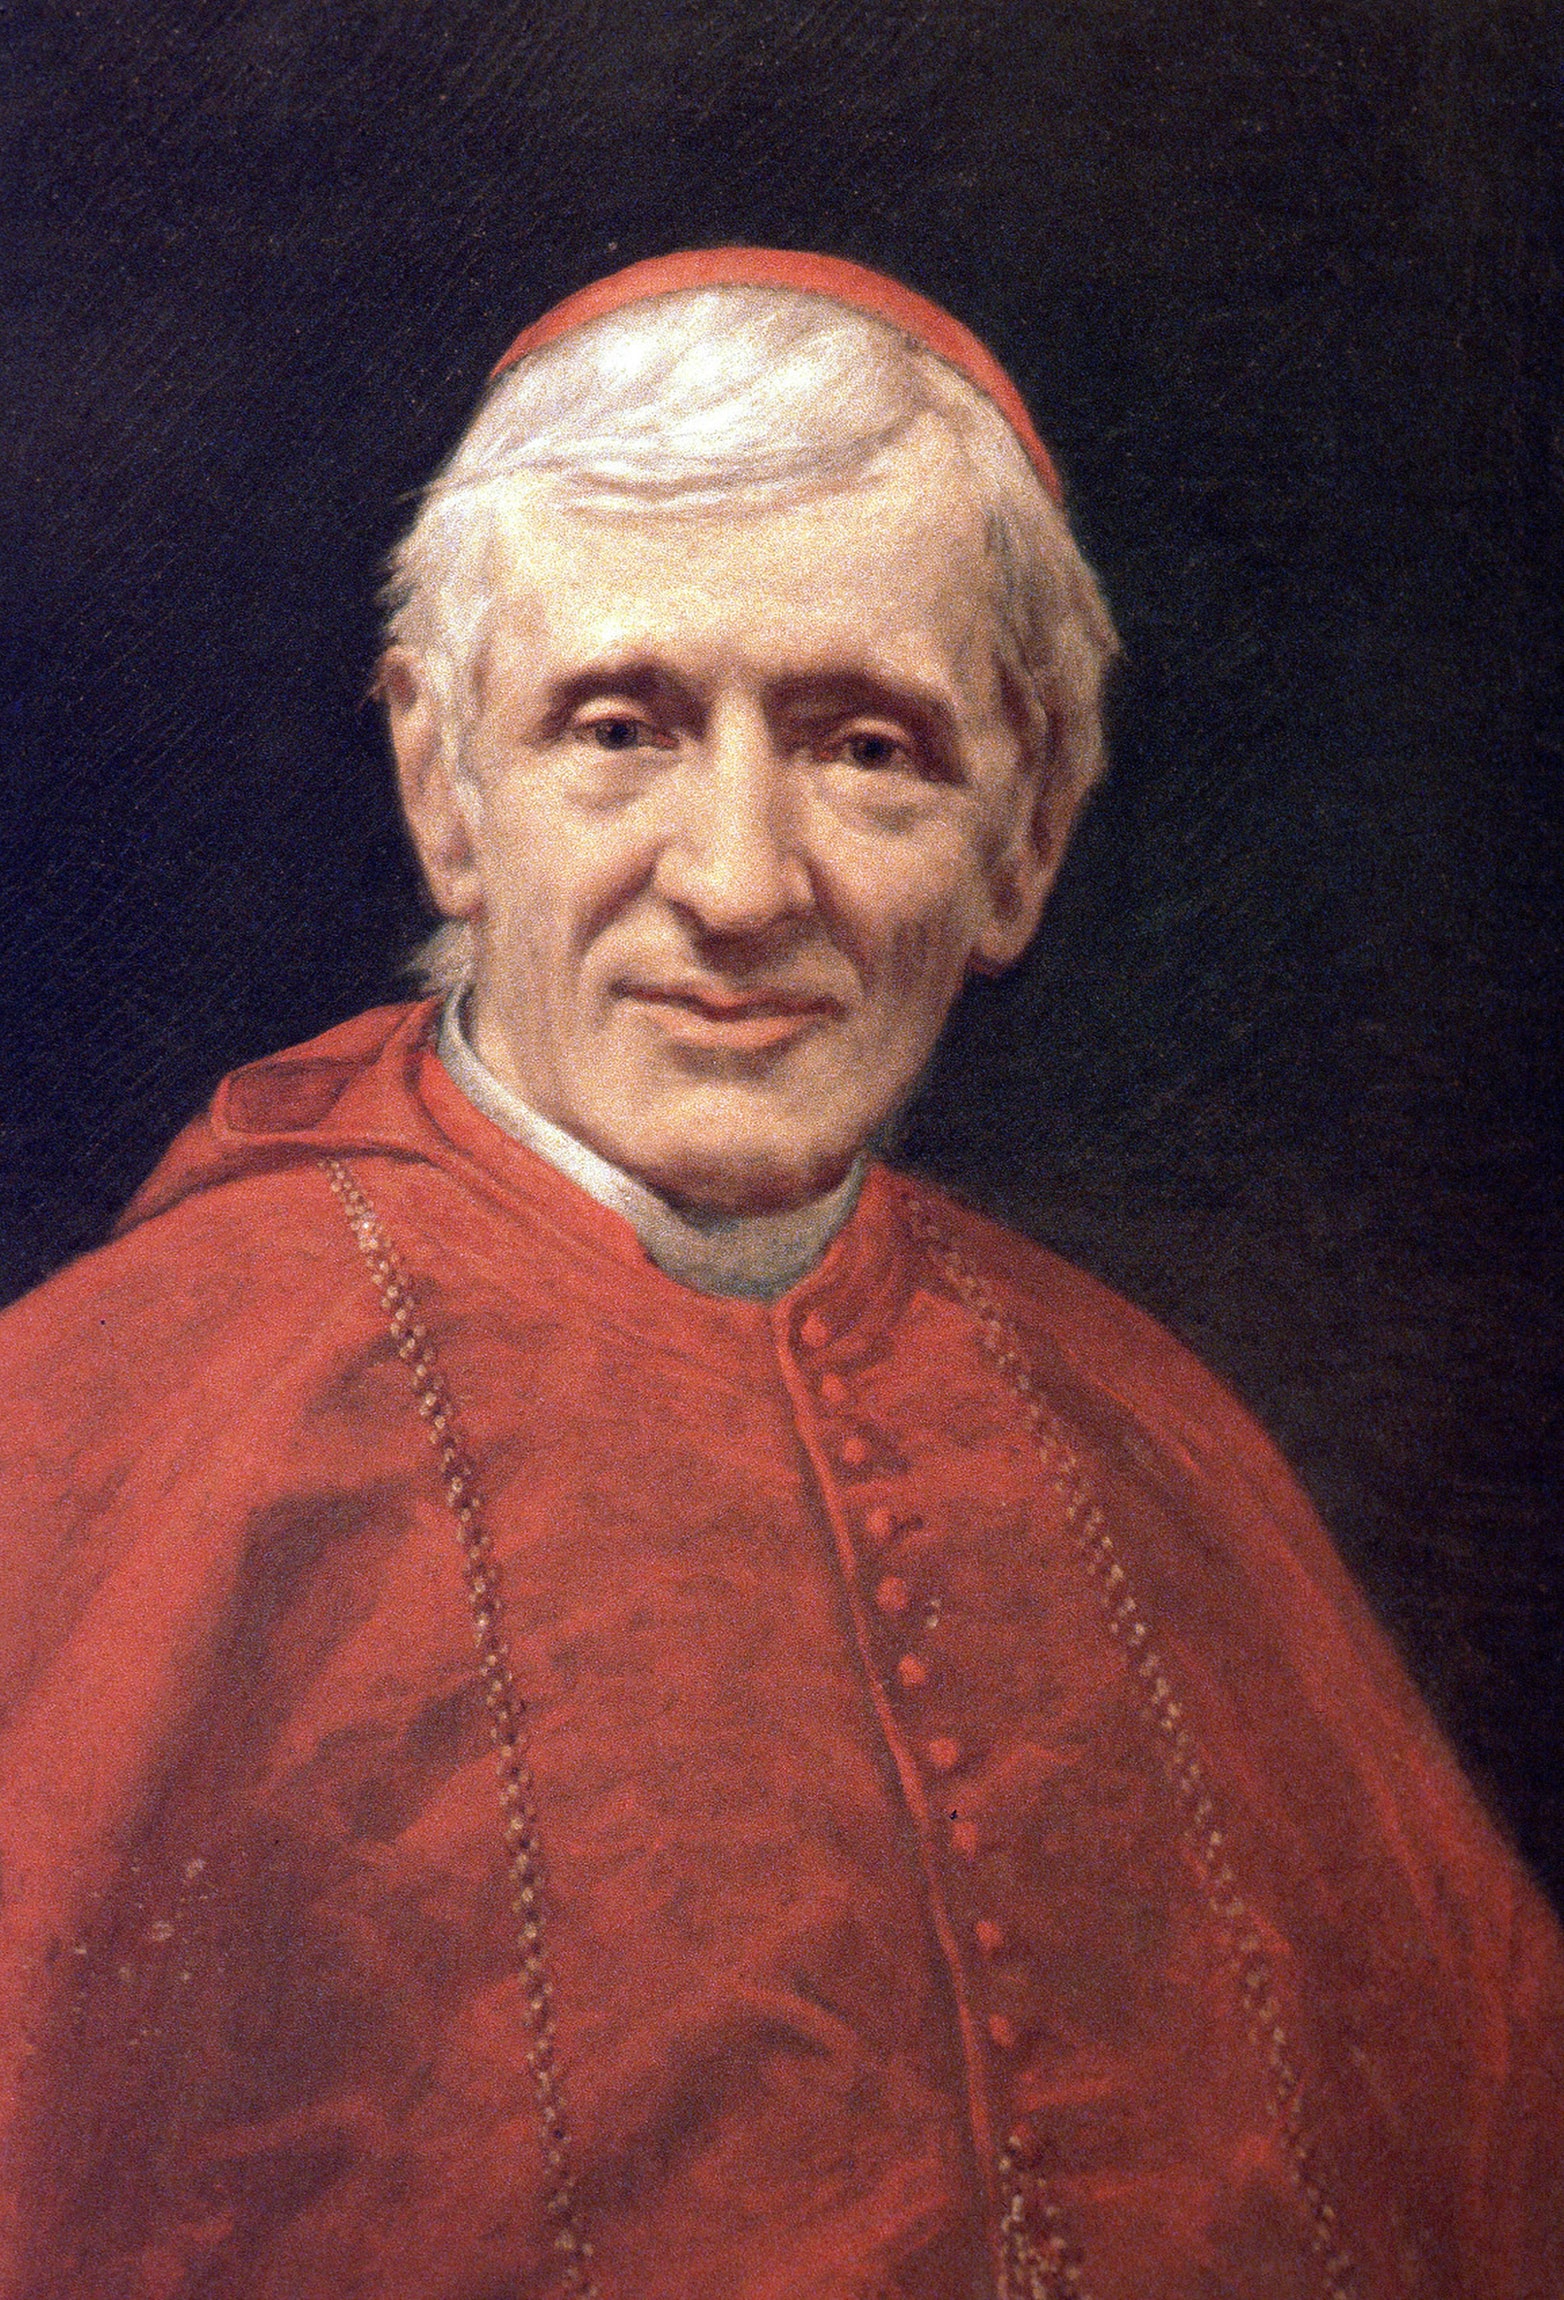 Cardinal John Henry Newman to be Canonized Oct. 13 Diocese of St